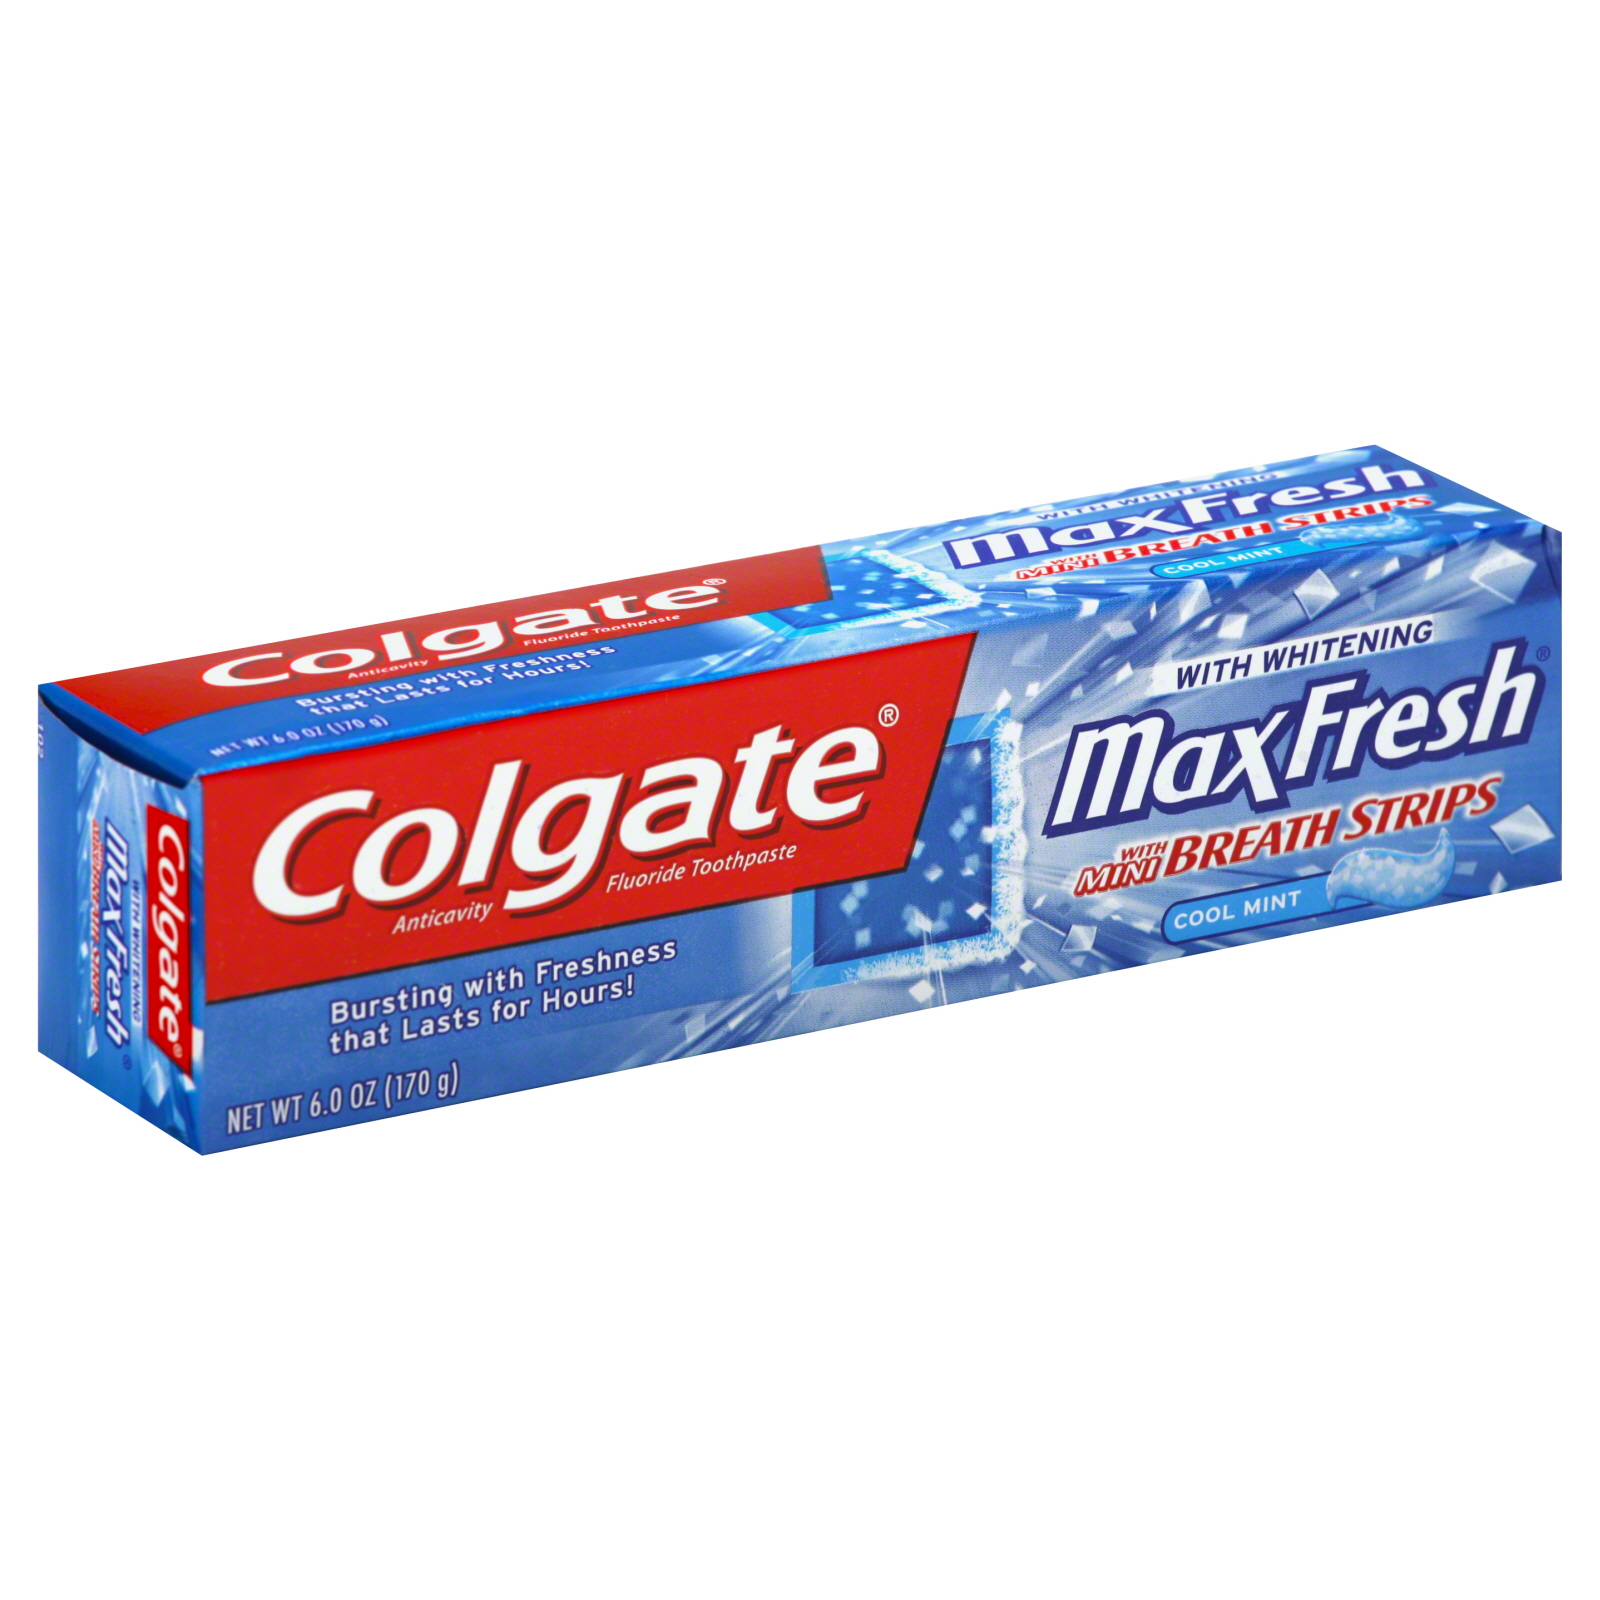 Colgate Max Fresh Toothpaste, Anticavity Fluoride, With Whitening, With Mini Breath Strips, Cool Mint, 6 oz (170 g)